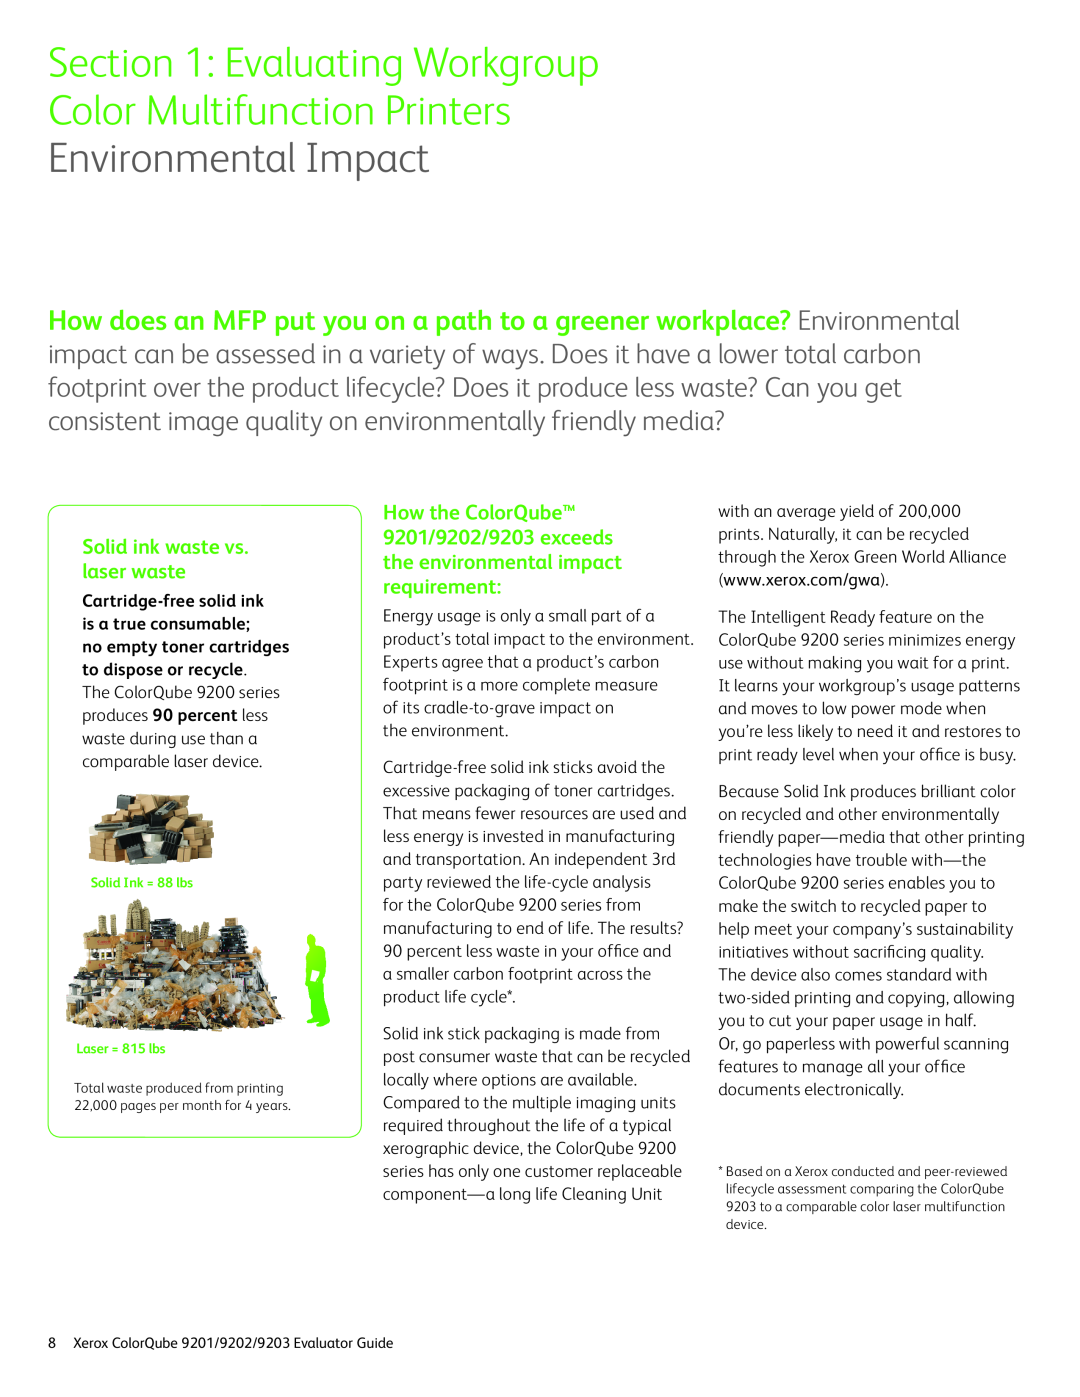 Xerox 9203, 9202 Environmental Impact, Solid ink waste vs. laser waste, Evaluating Workgroup, Color Multifunction Printers 